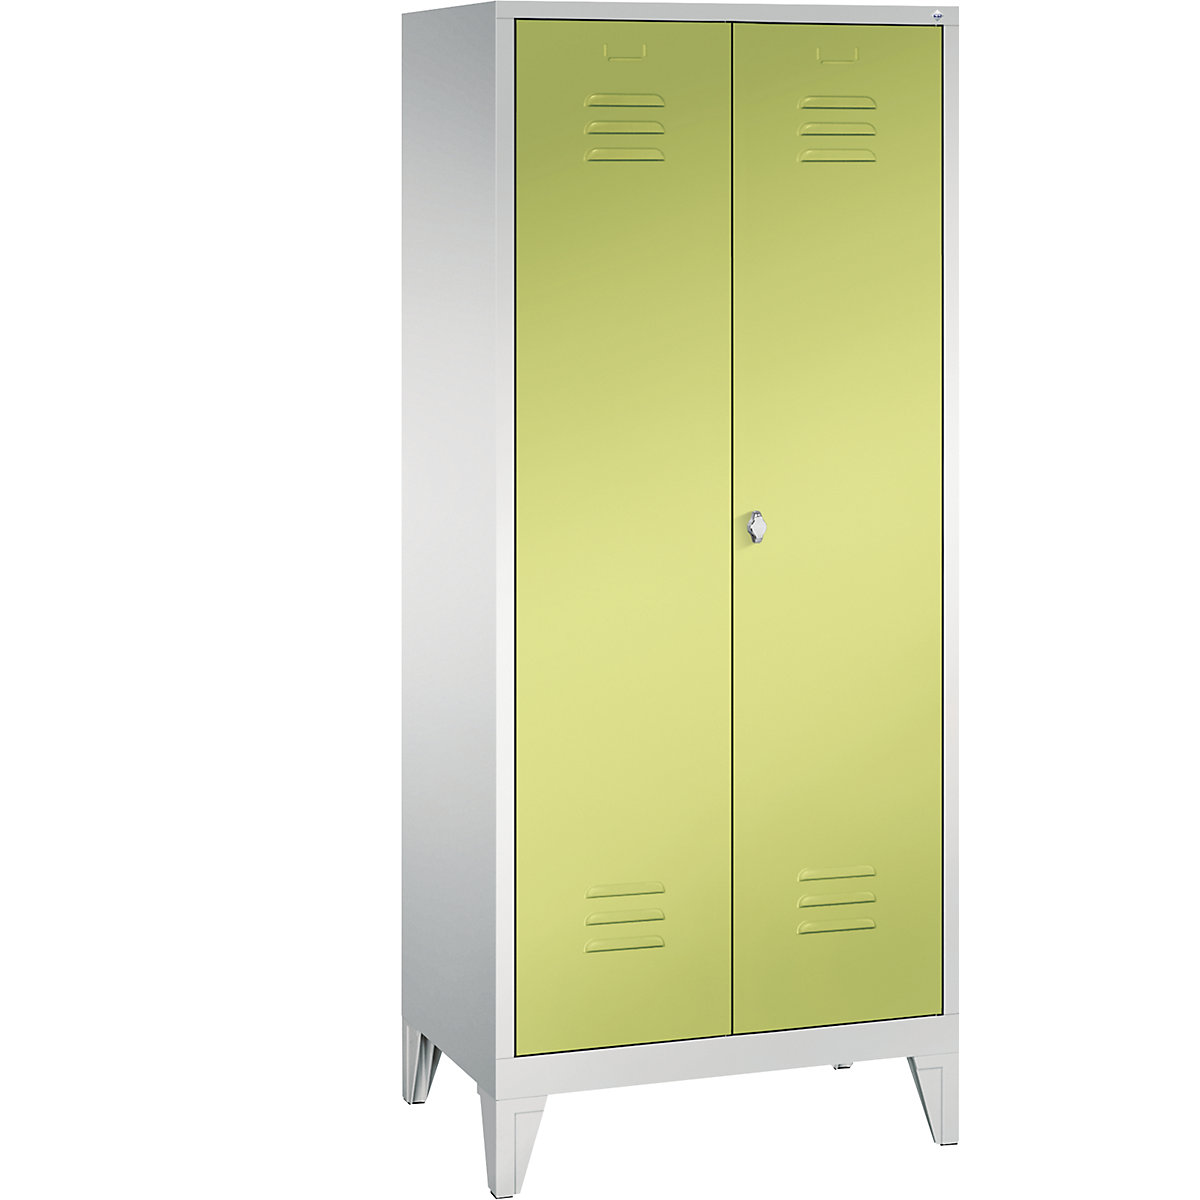 CLASSIC equipment cupboard with feet – C+P, 2 compartments, compartment width 400 mm, light grey / viridian green-12